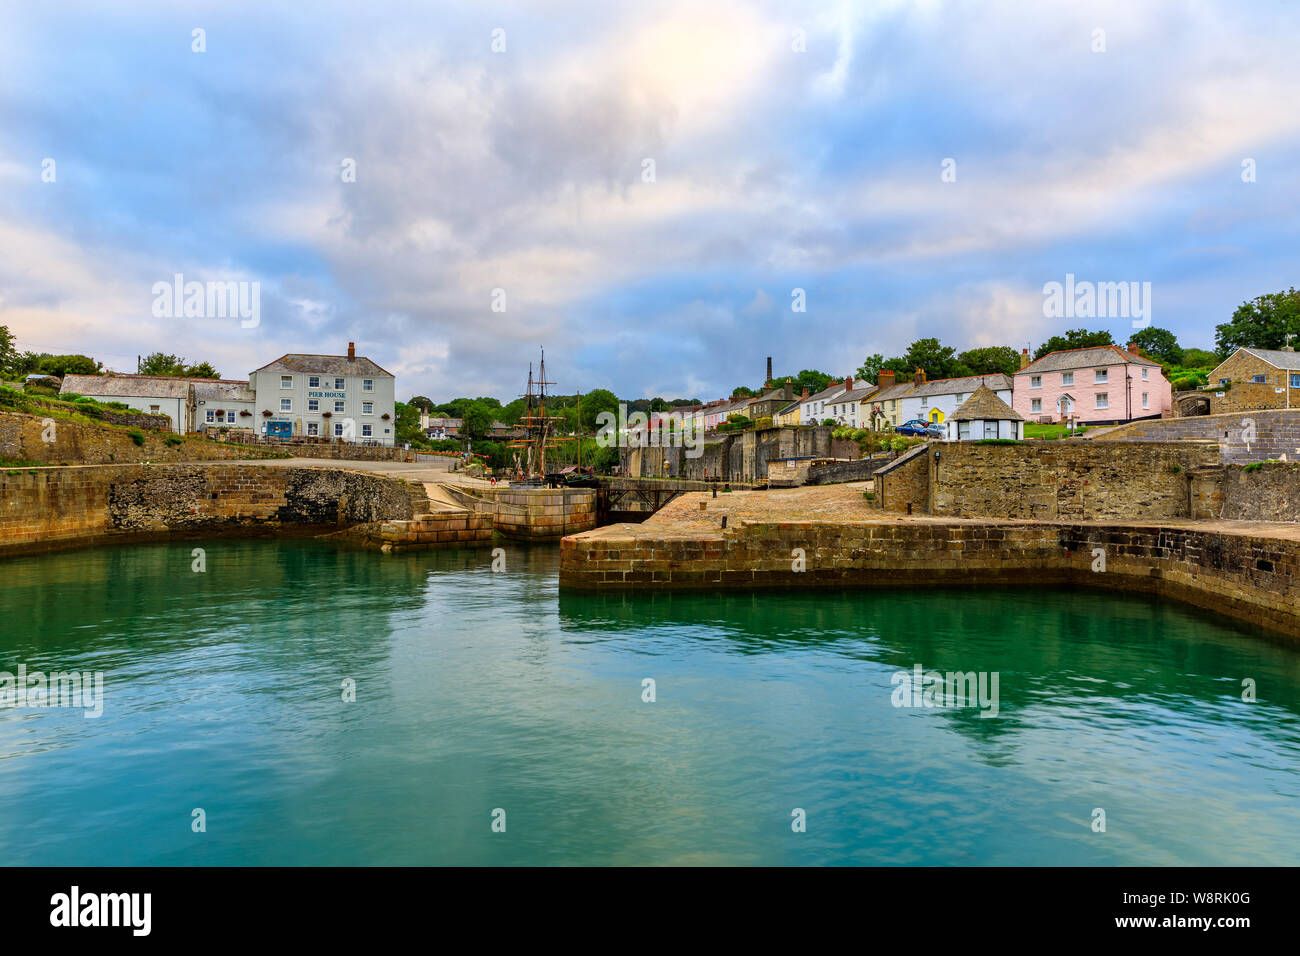 CHARLESTOWN, CORNWALL, UK - JUNE 30 2019: A view of the harbour in Charlestown near St Austell in Cornwall. Stock Photo